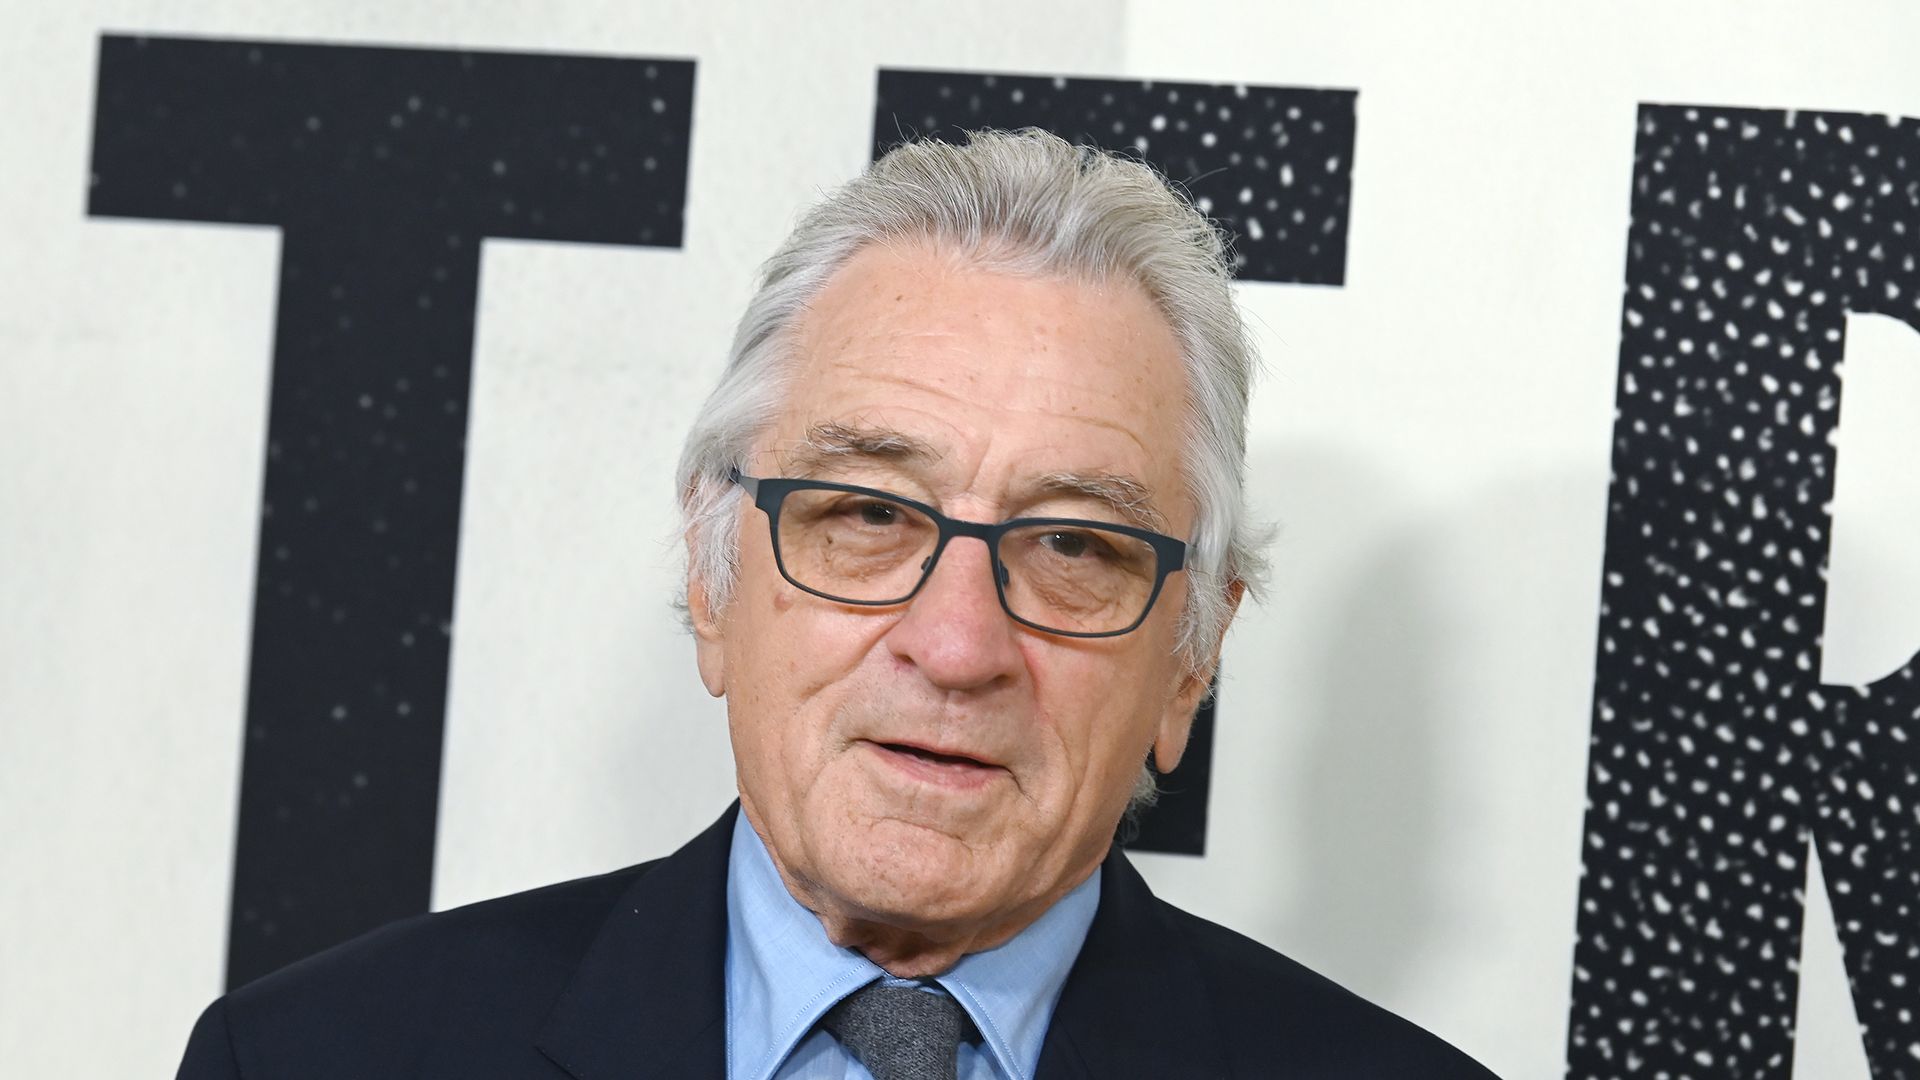 Robert De Niro, 80, makes emotional confession about relationship with baby daughter Gia